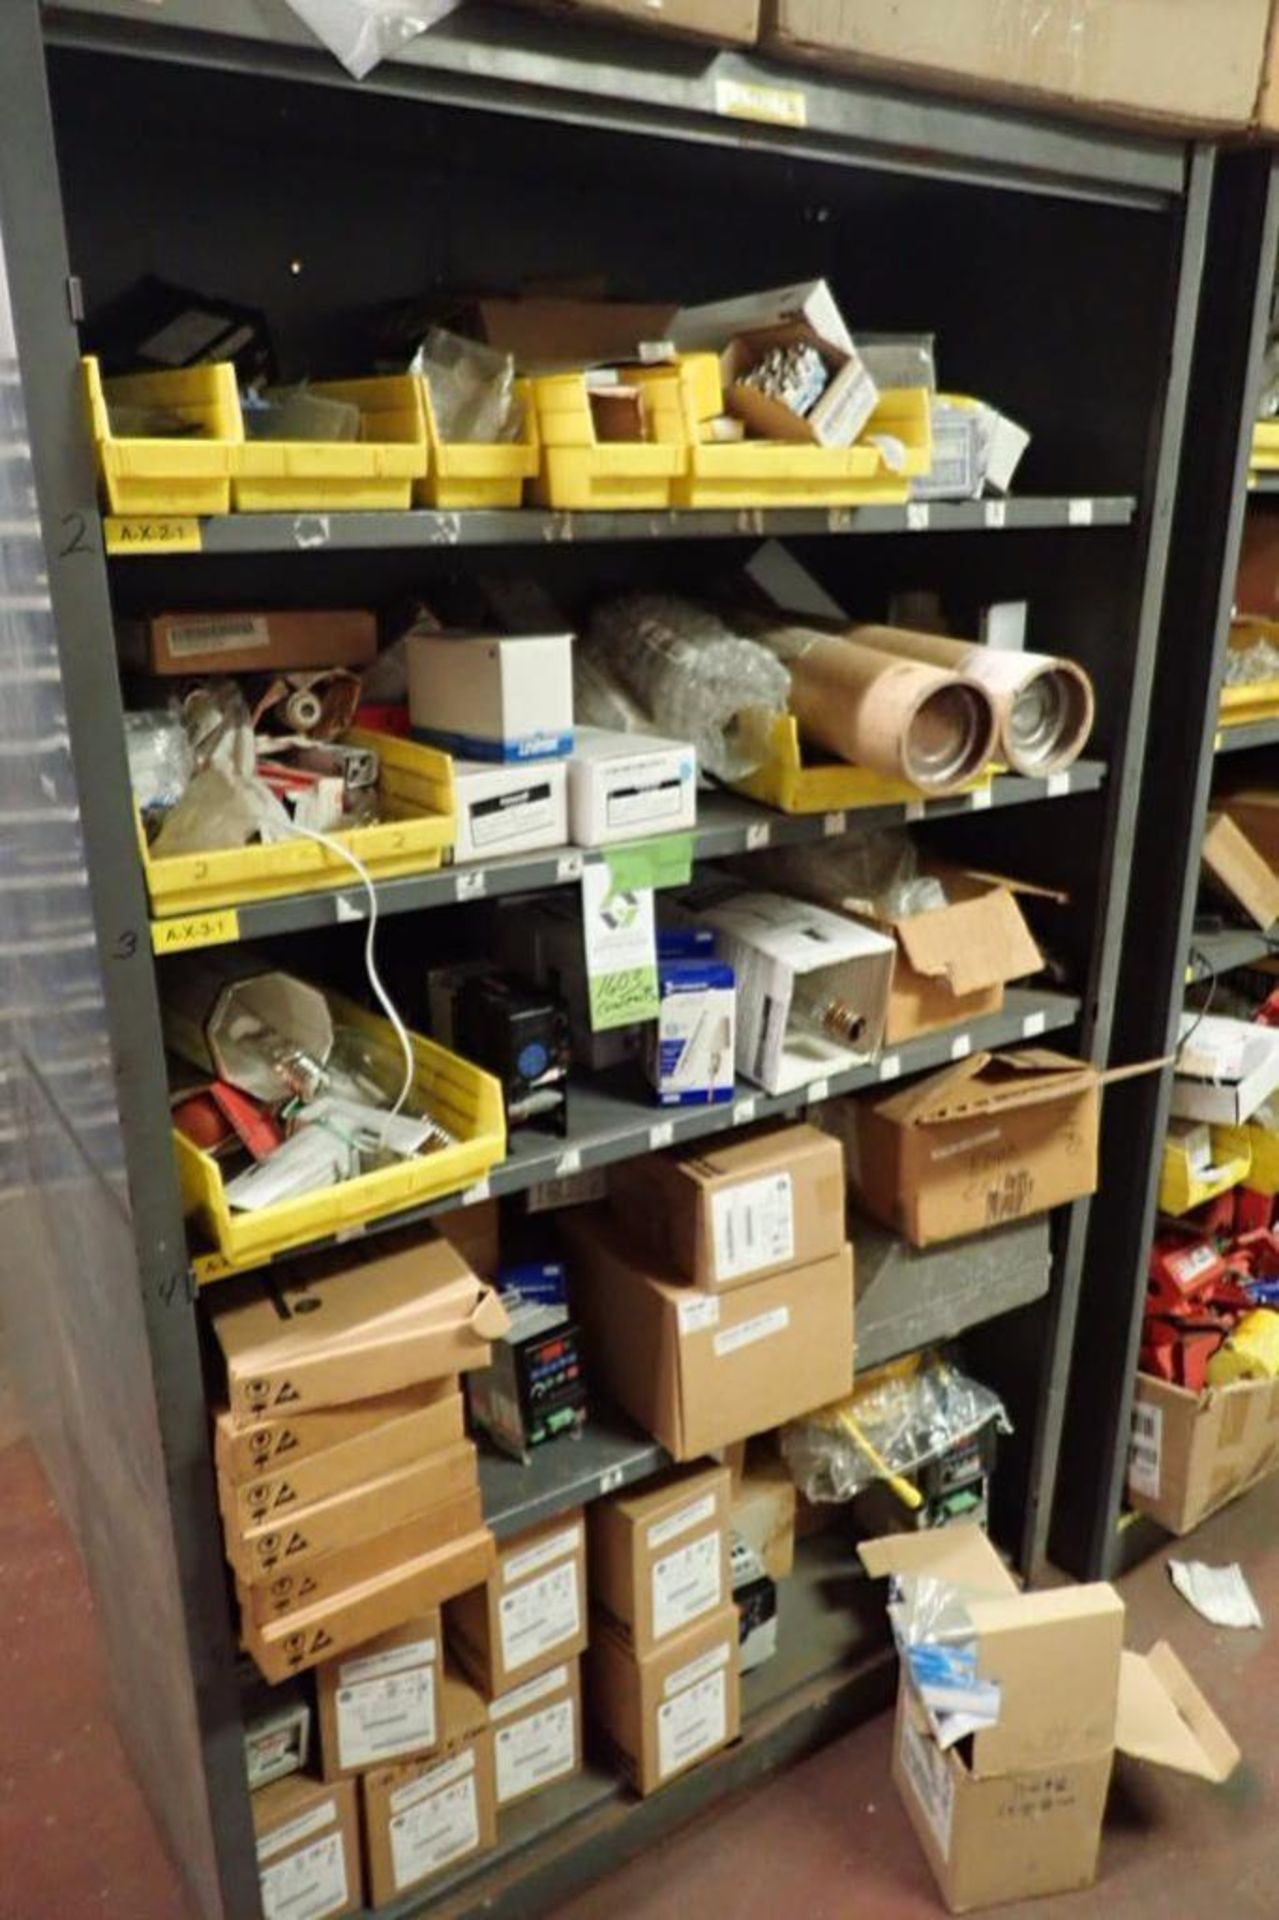 Contents only of 1 section of shelving, Allen Bradley vfds, power flex 4, 4m, 40, 525, Loma scale he